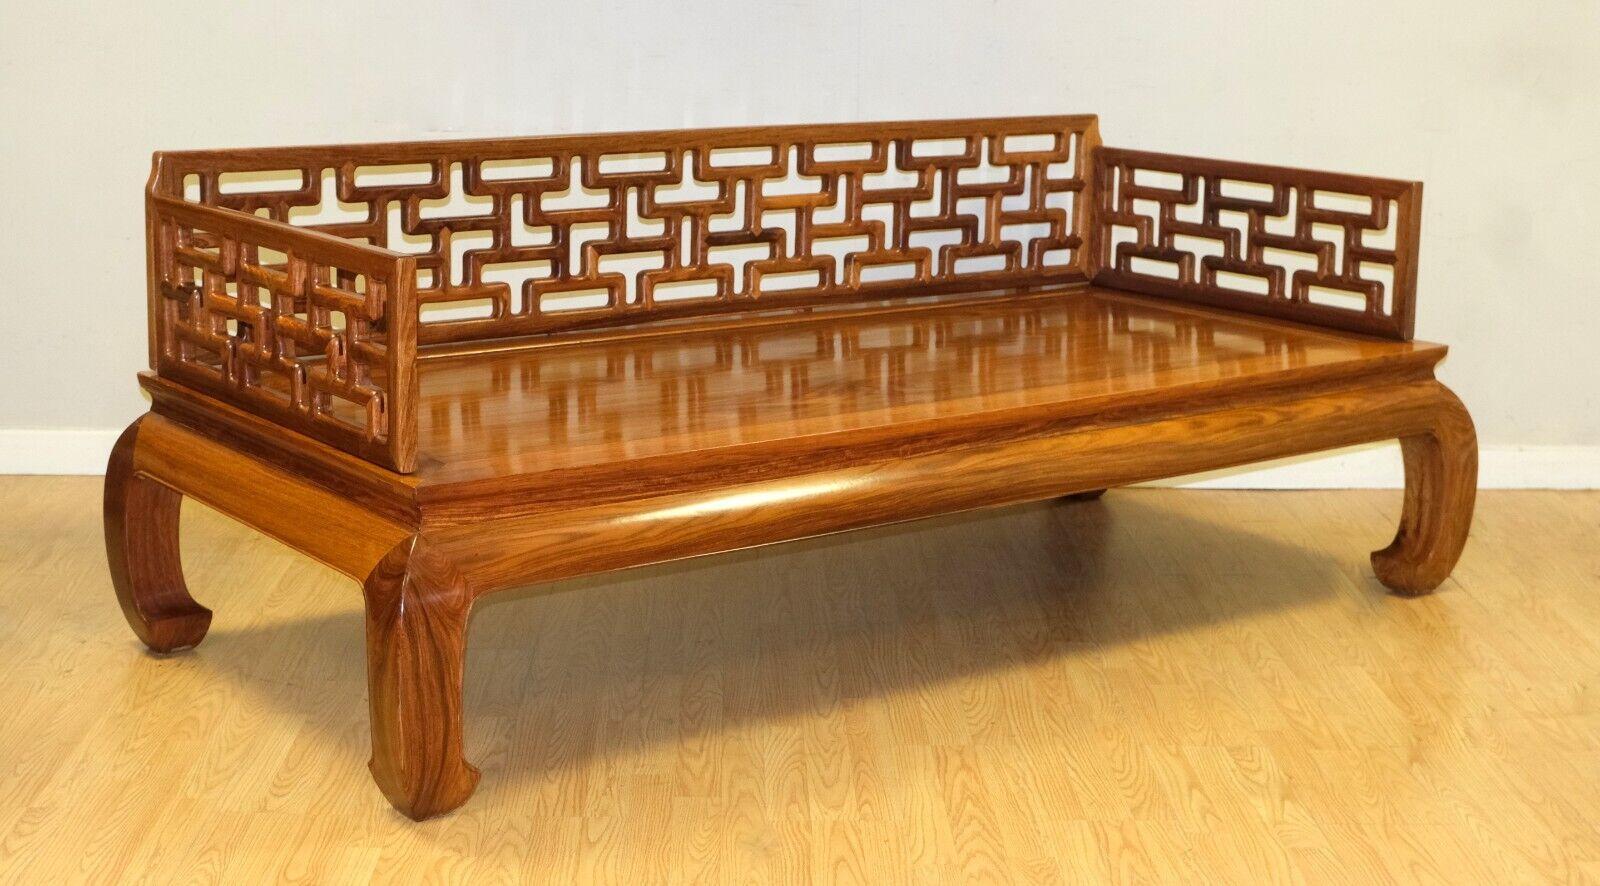 We are delighted to offer for sale this stunning Ming Elmwood Day or Opium bed raised on horse hoof solid feet.

This sturdy and beautiful hardwood, Lou Han bed is a unique, Chinese, traditional piece. The side and back shows lovely carved details